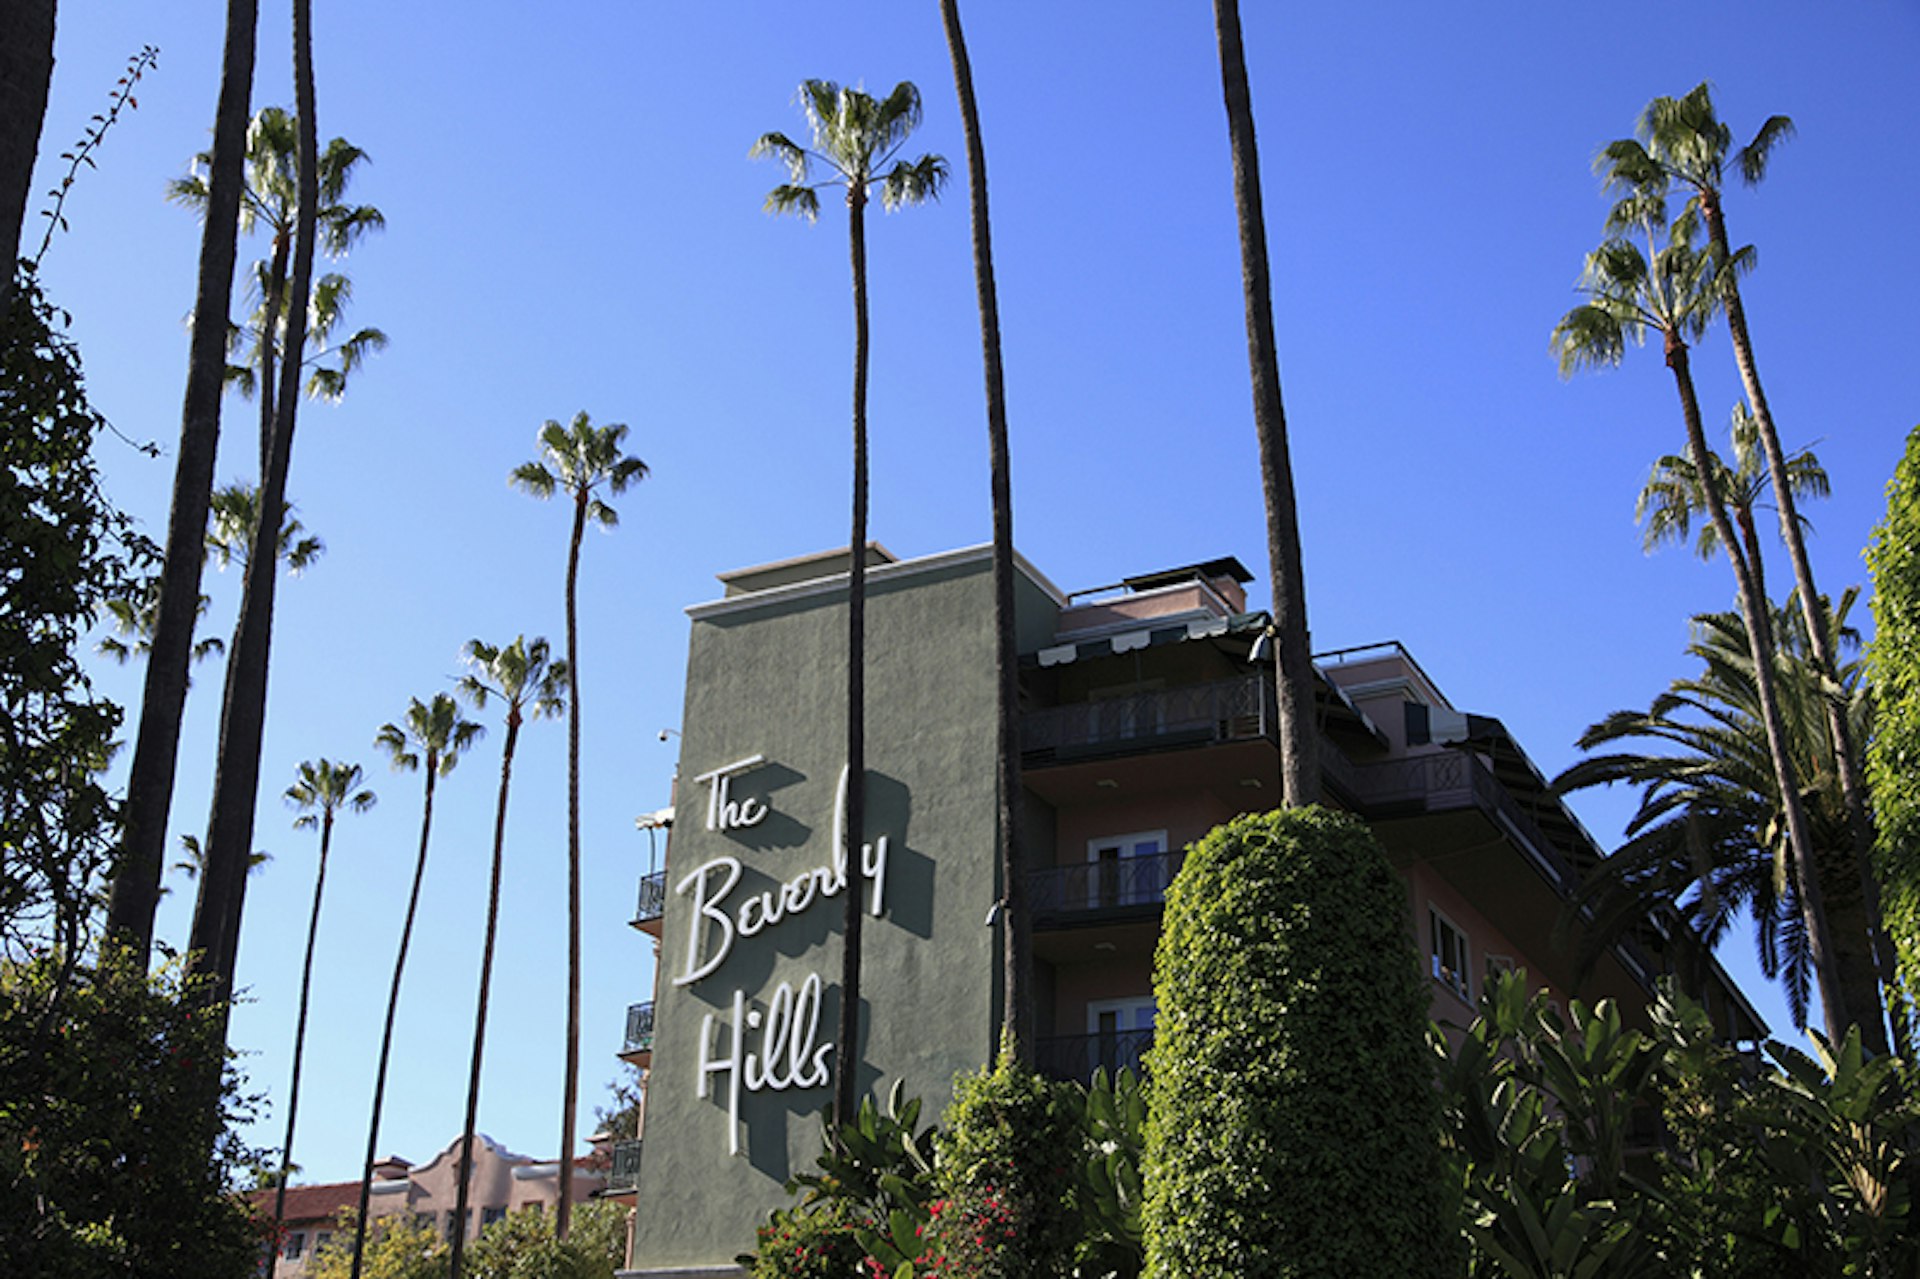 Beverly Hills Hotel. Photo by Wendy Connett / Getty Images.